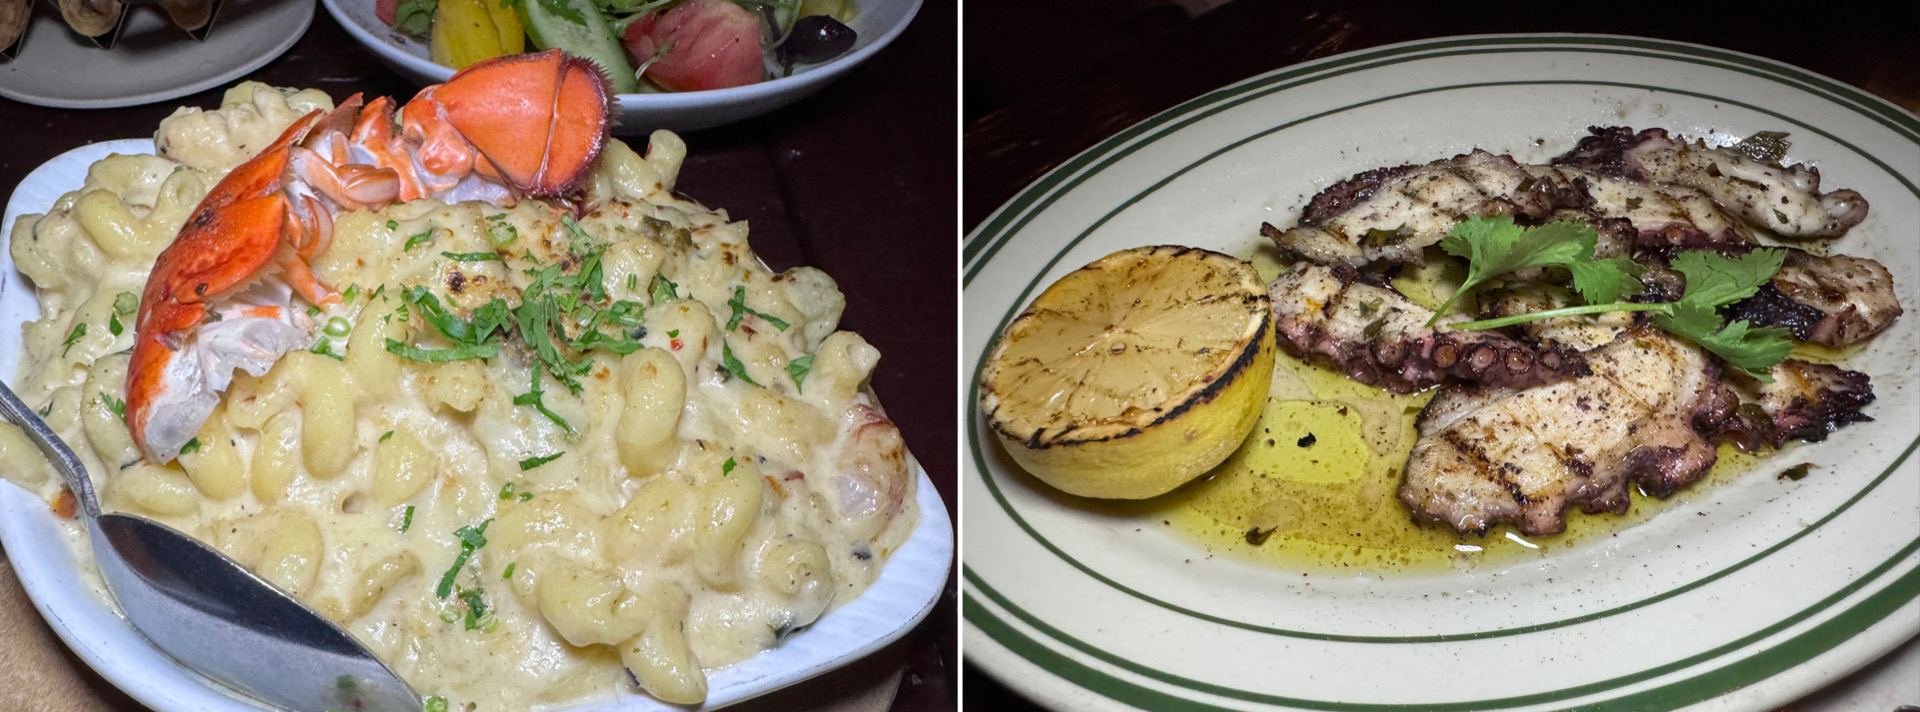 An image of the Truffle Lobster Mac and Grilled Spanish Octopus from Jonah's Kitchen.